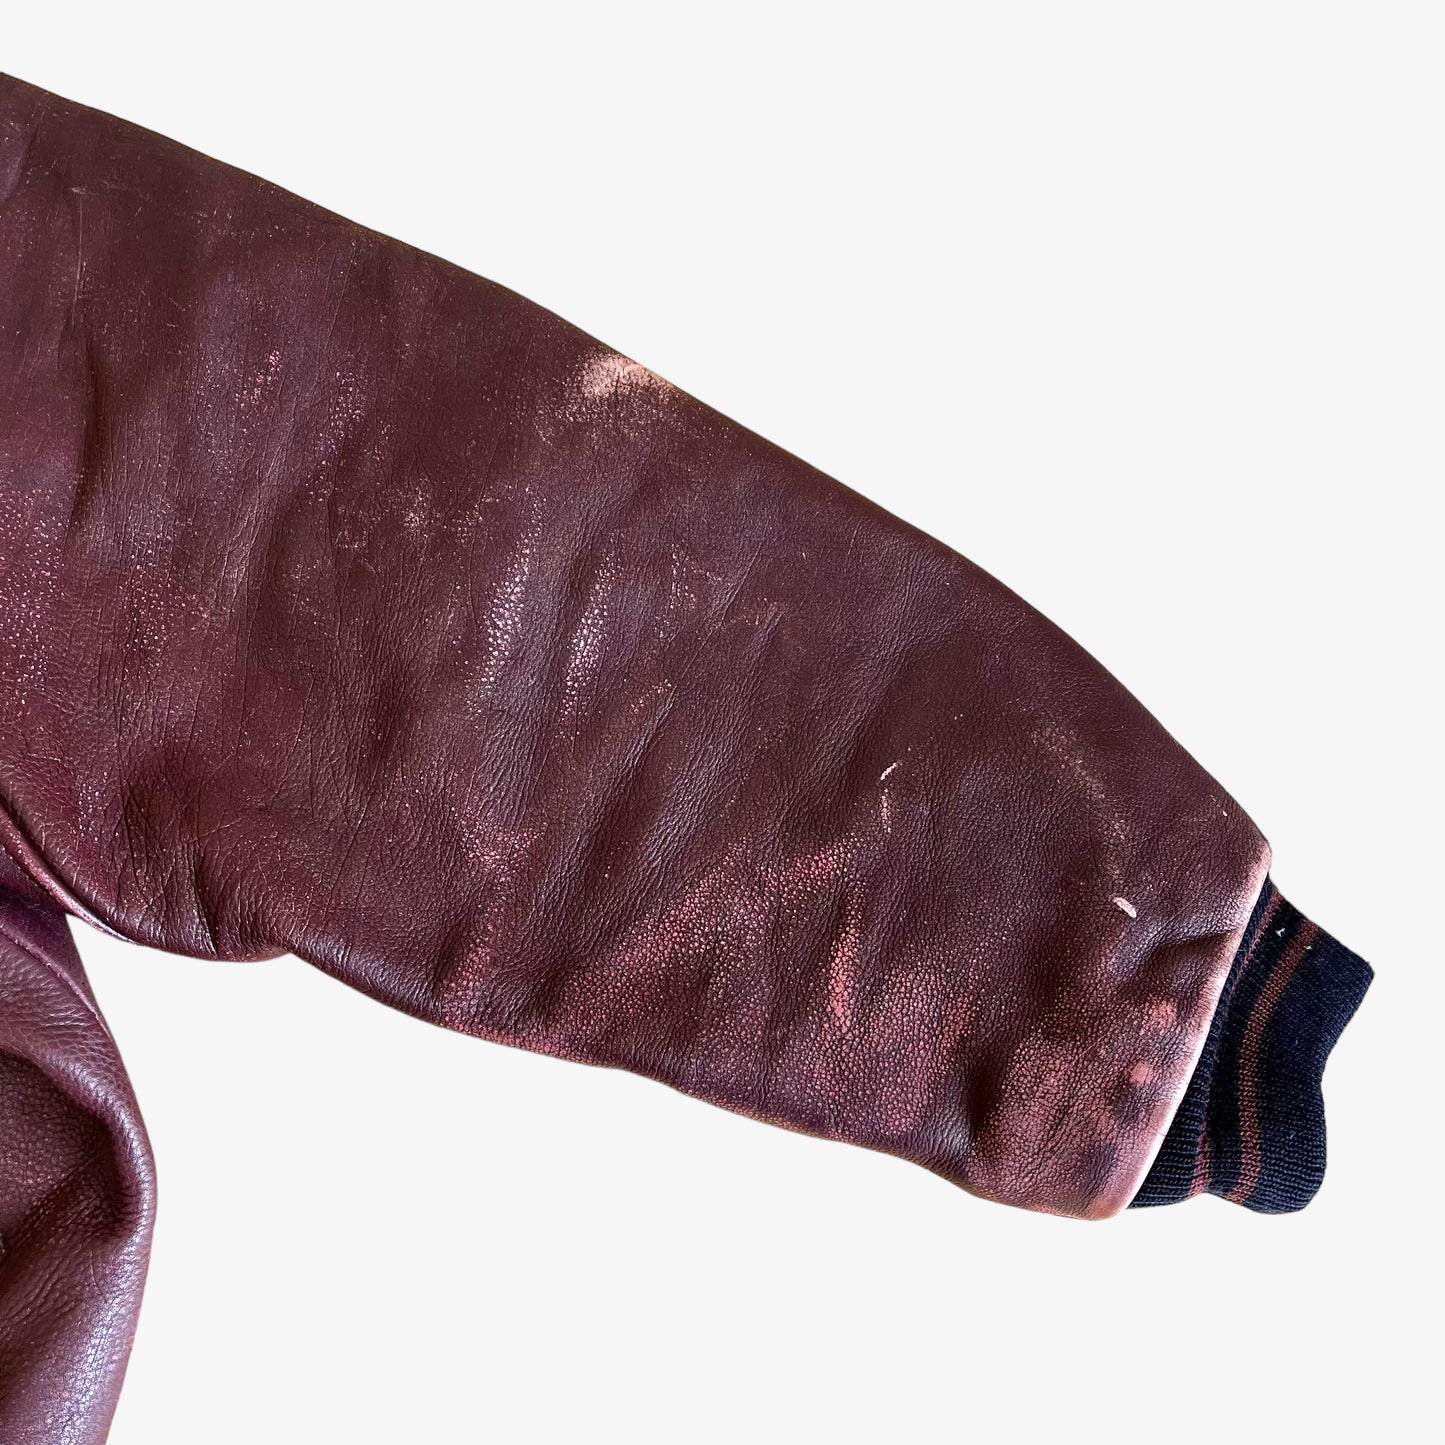 Vintage 90s Chevignon Burgundy Leather Jacket With Back Spell Out Arm - Casspios Dream